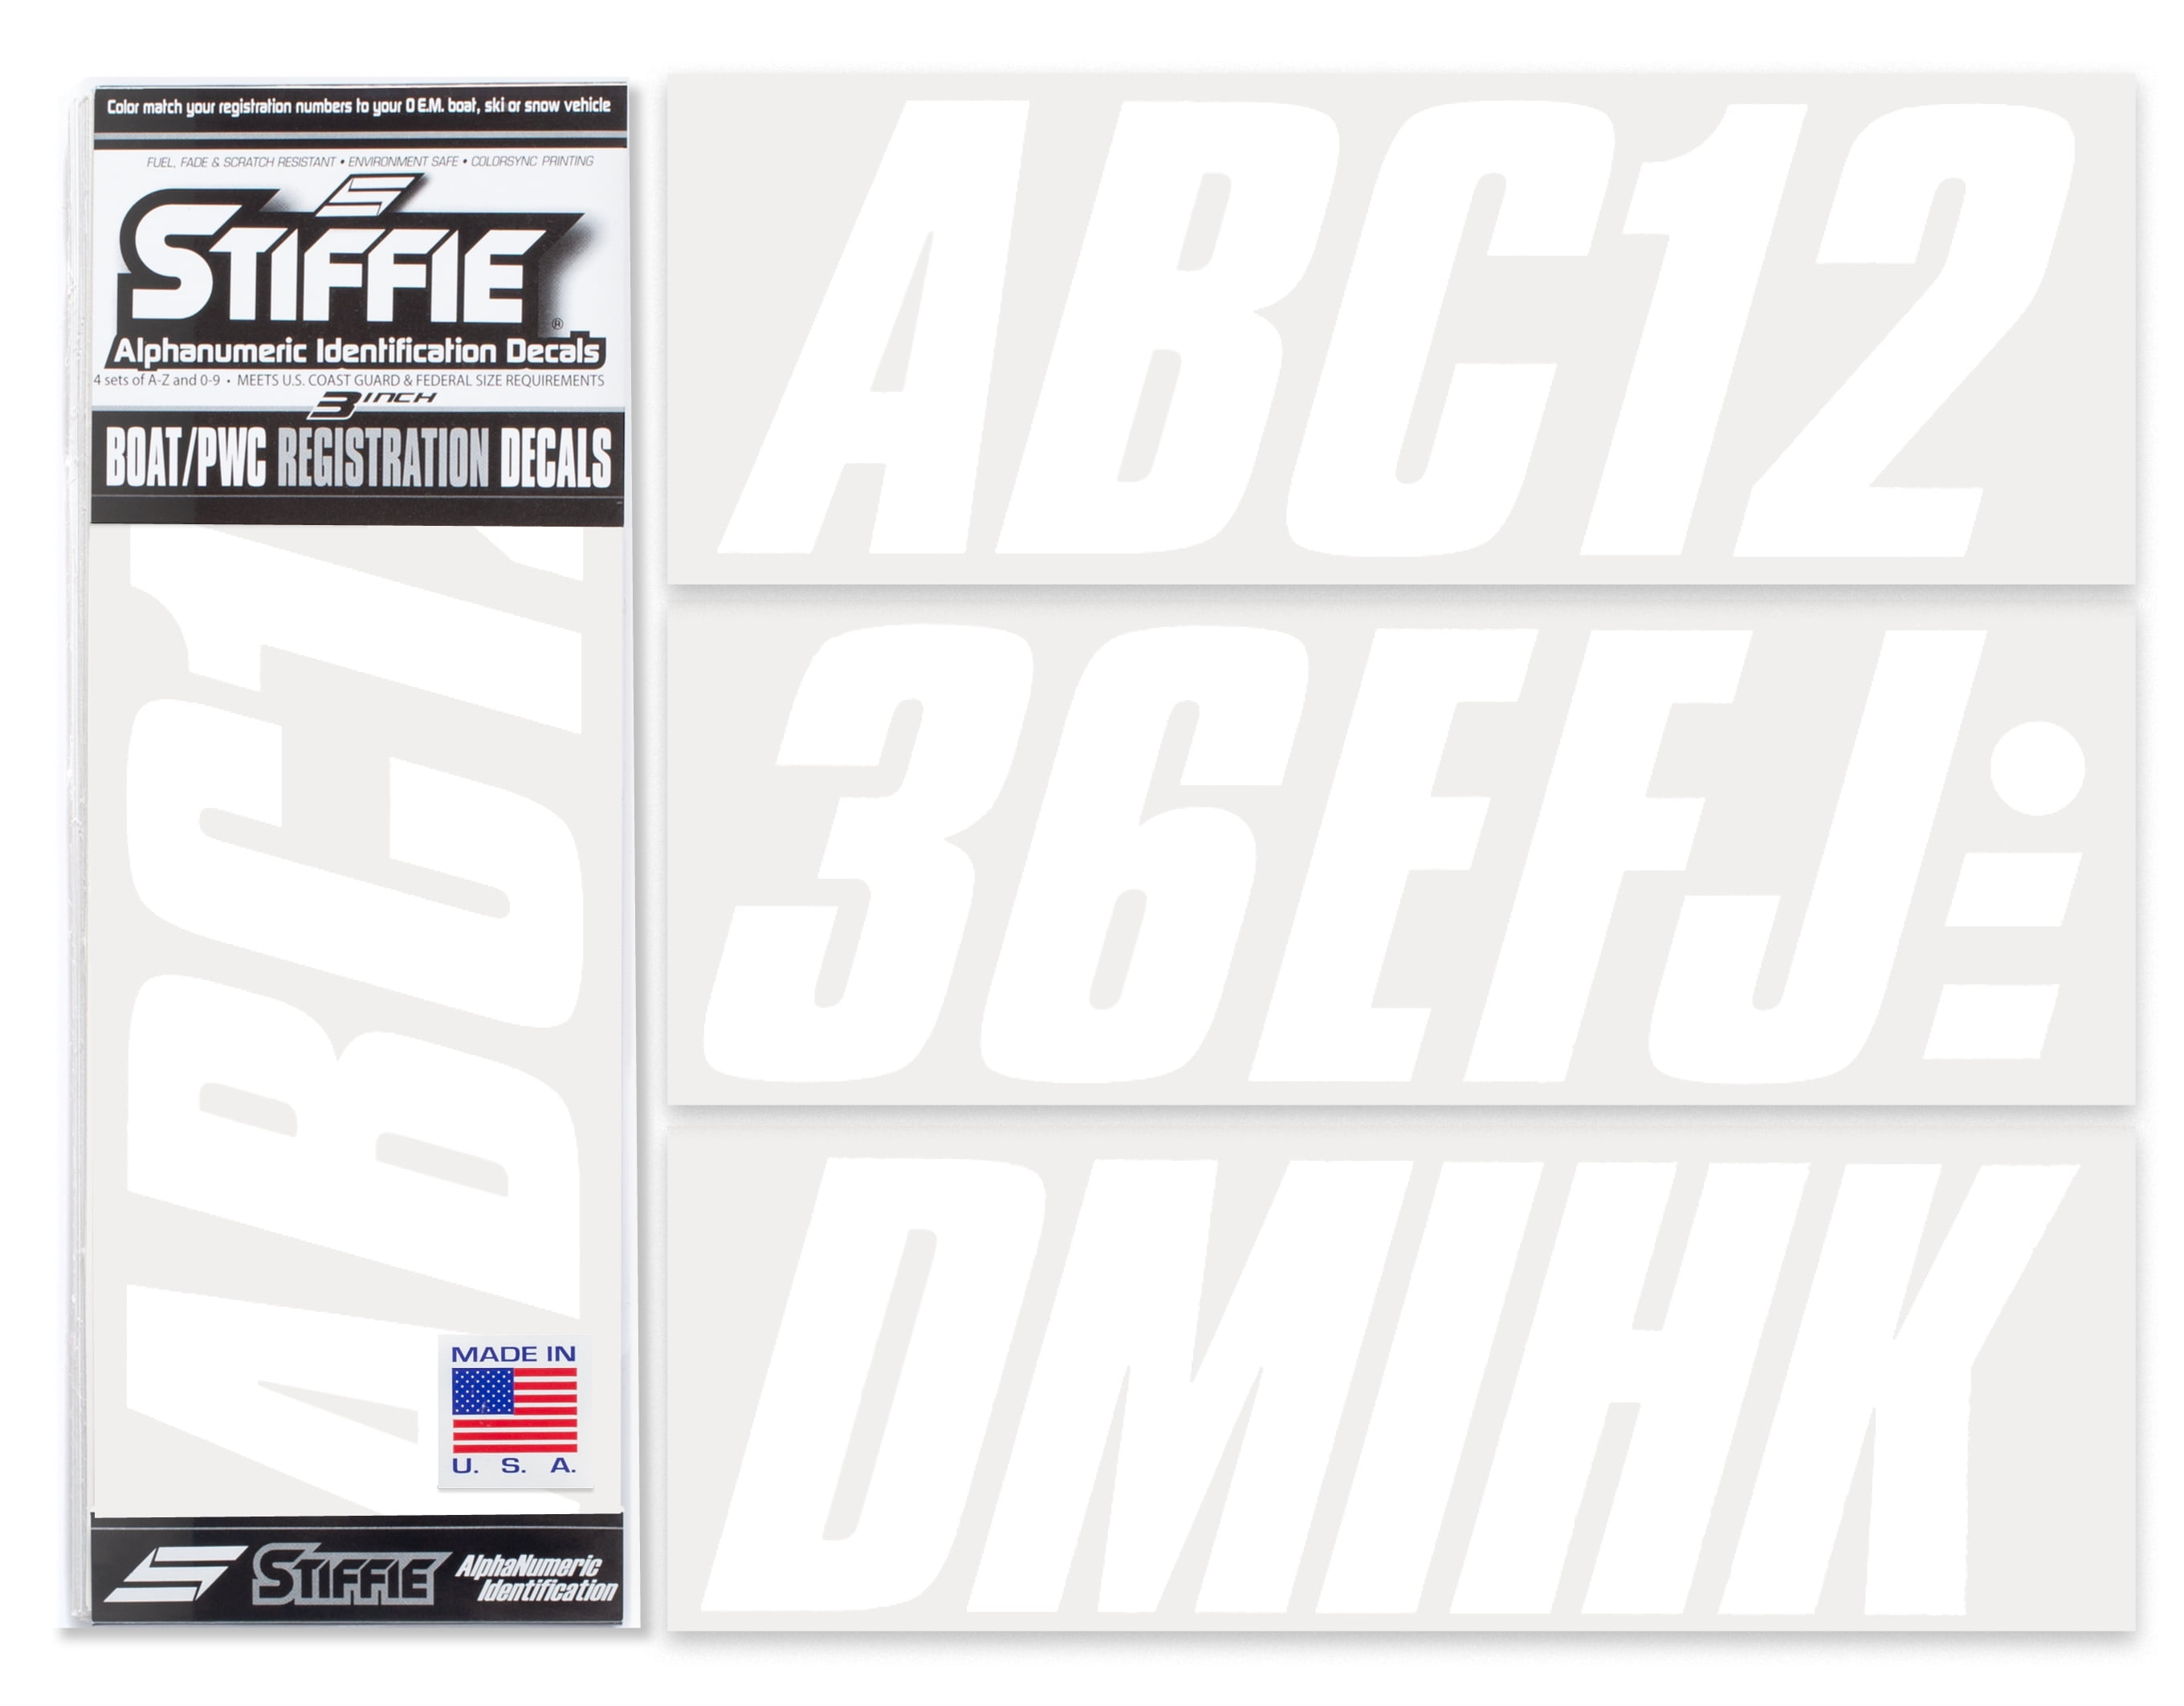 Stiffie Whipline Electric Yellow/Black 3 Alpha-Numeric Registration Identification Numbers Stickers Decals for Boats & Personal Watercraft